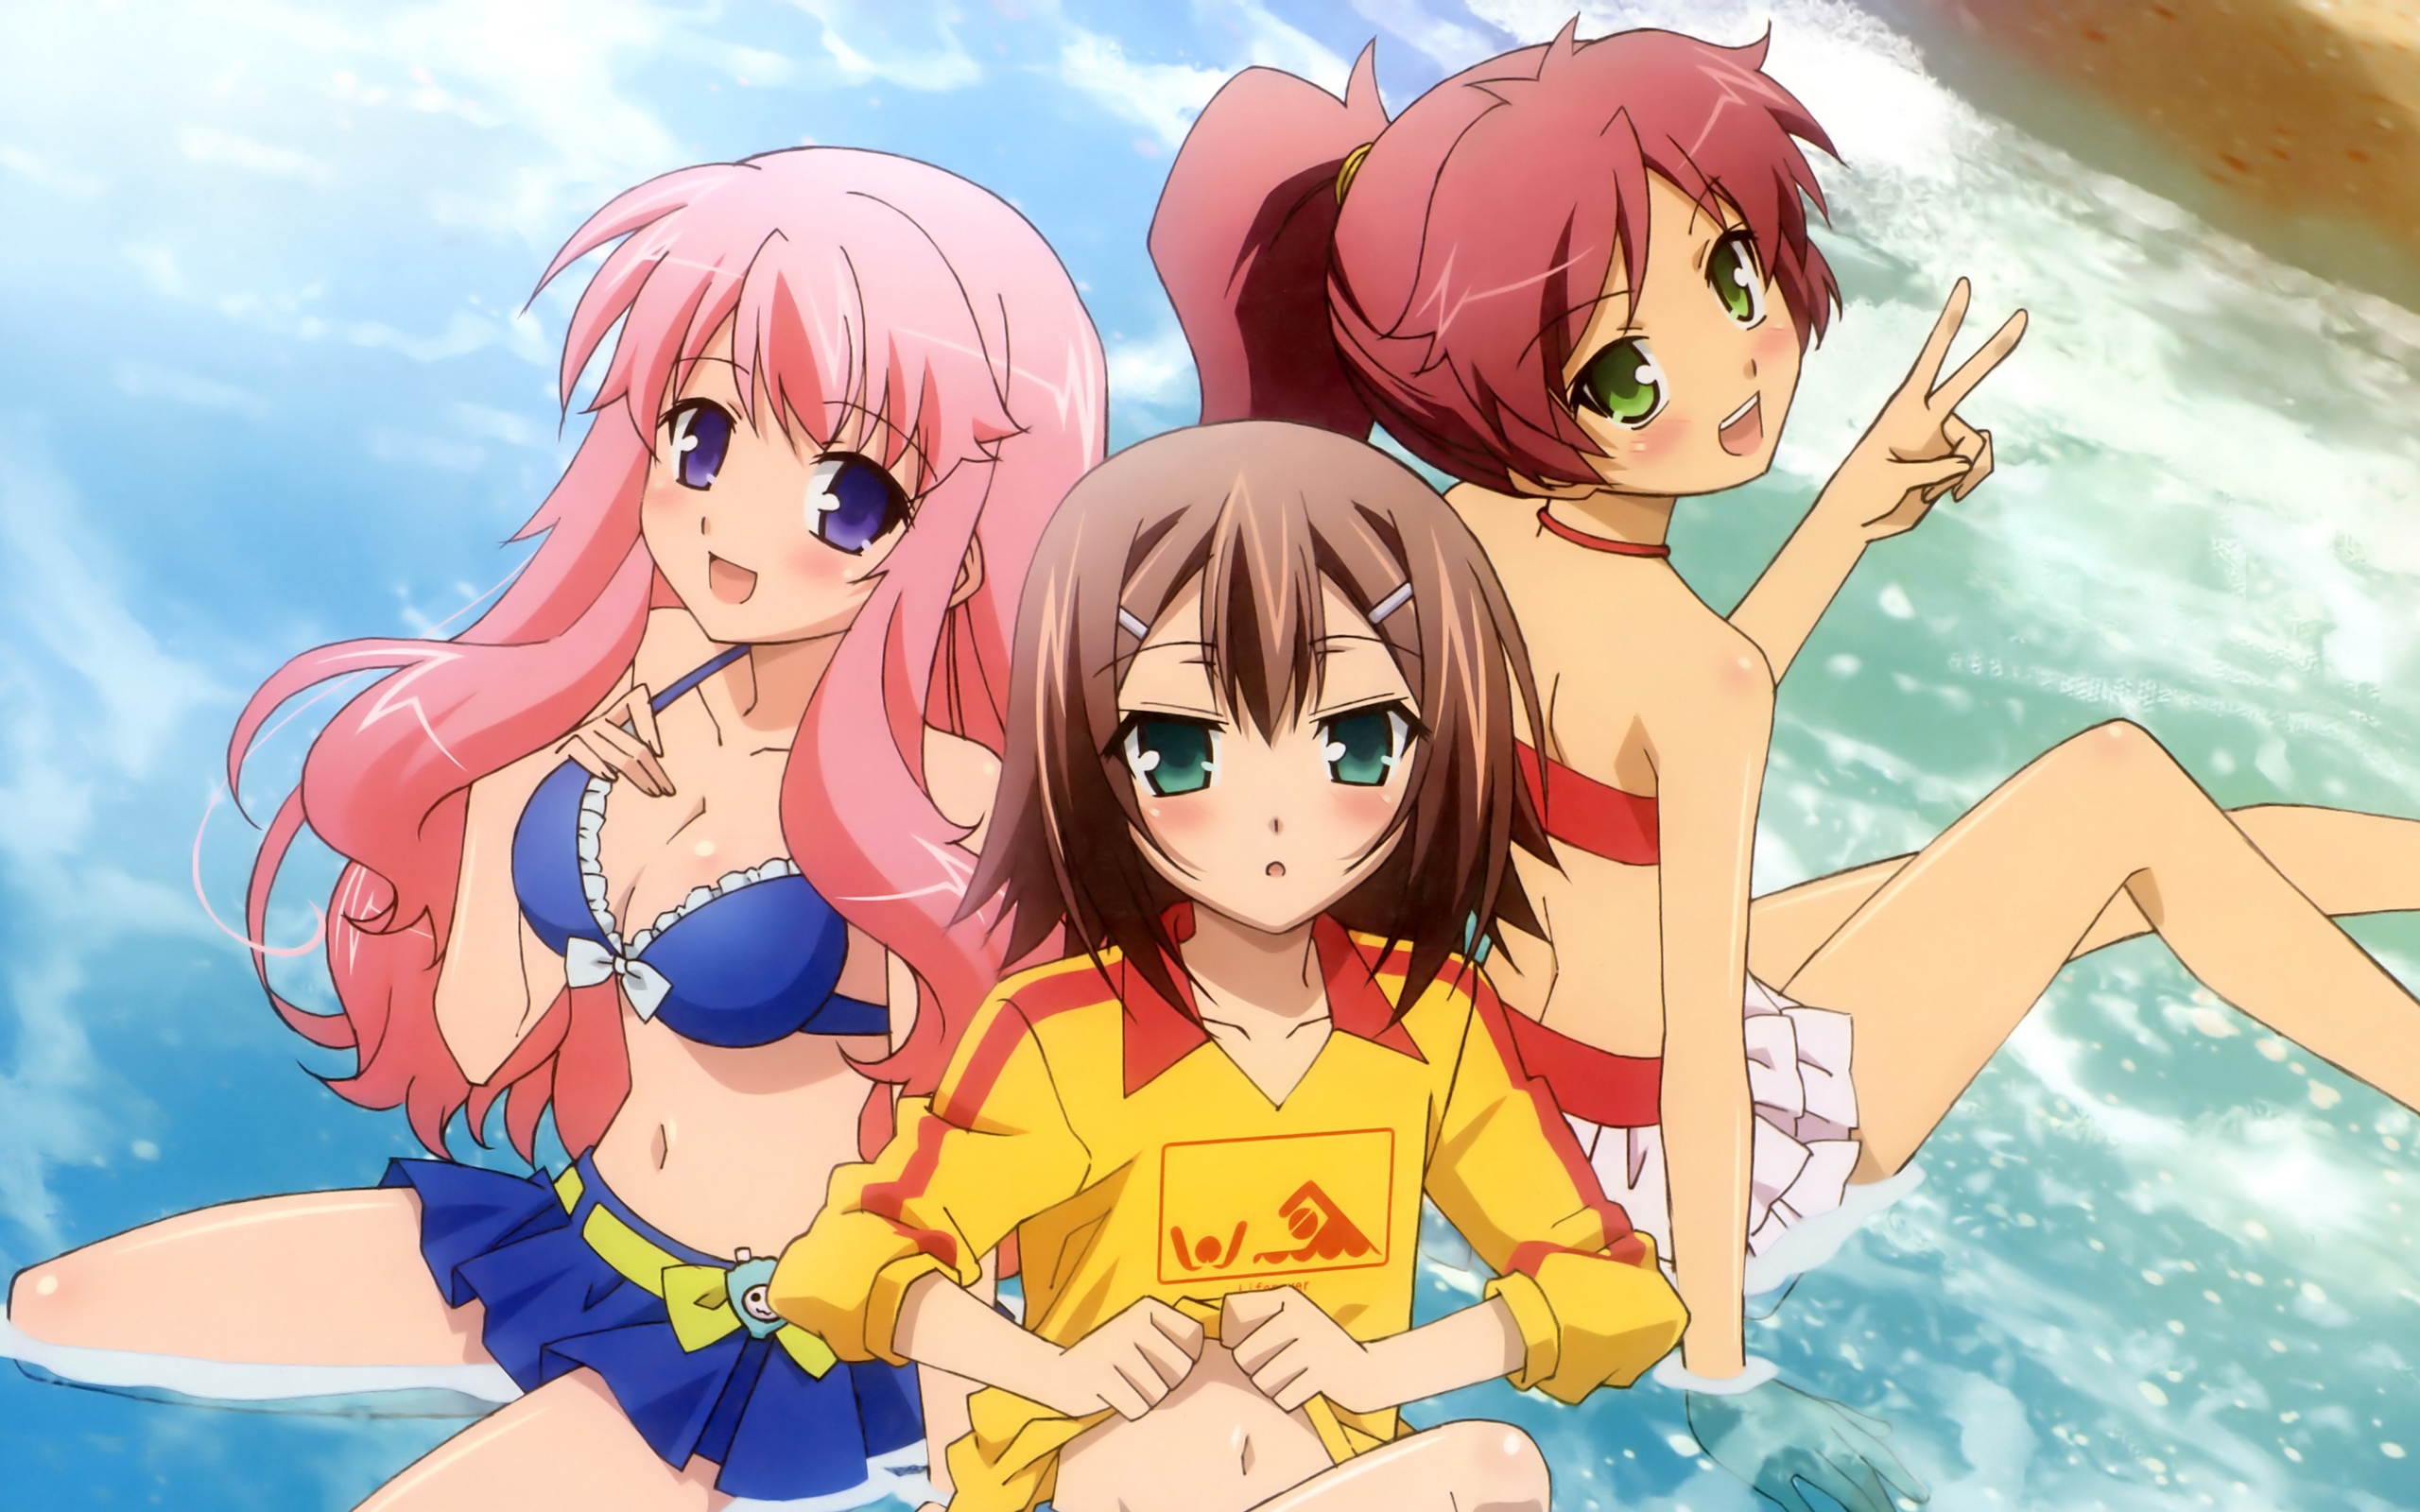 Baka and Test HD Wallpapers and Backgrounds. 